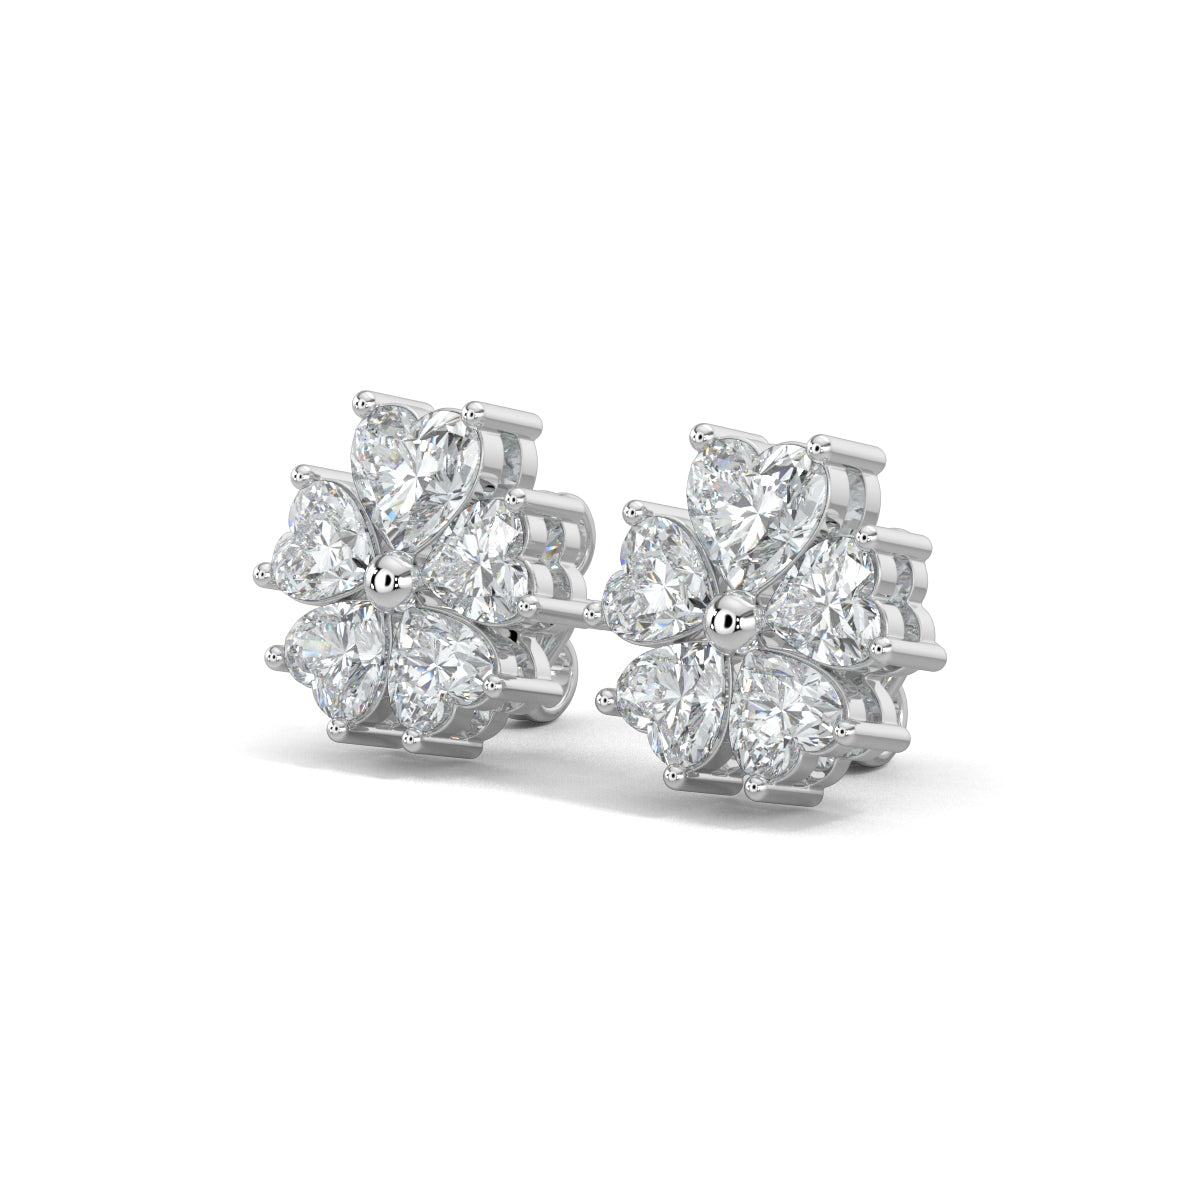 White Gold, Diamond earrings, natural diamond earrings, lab-grown diamond earrings, Heart-shaped diamond stud earrings, floral diamond earrings, Forever Yours collection, flower-shaped earrings